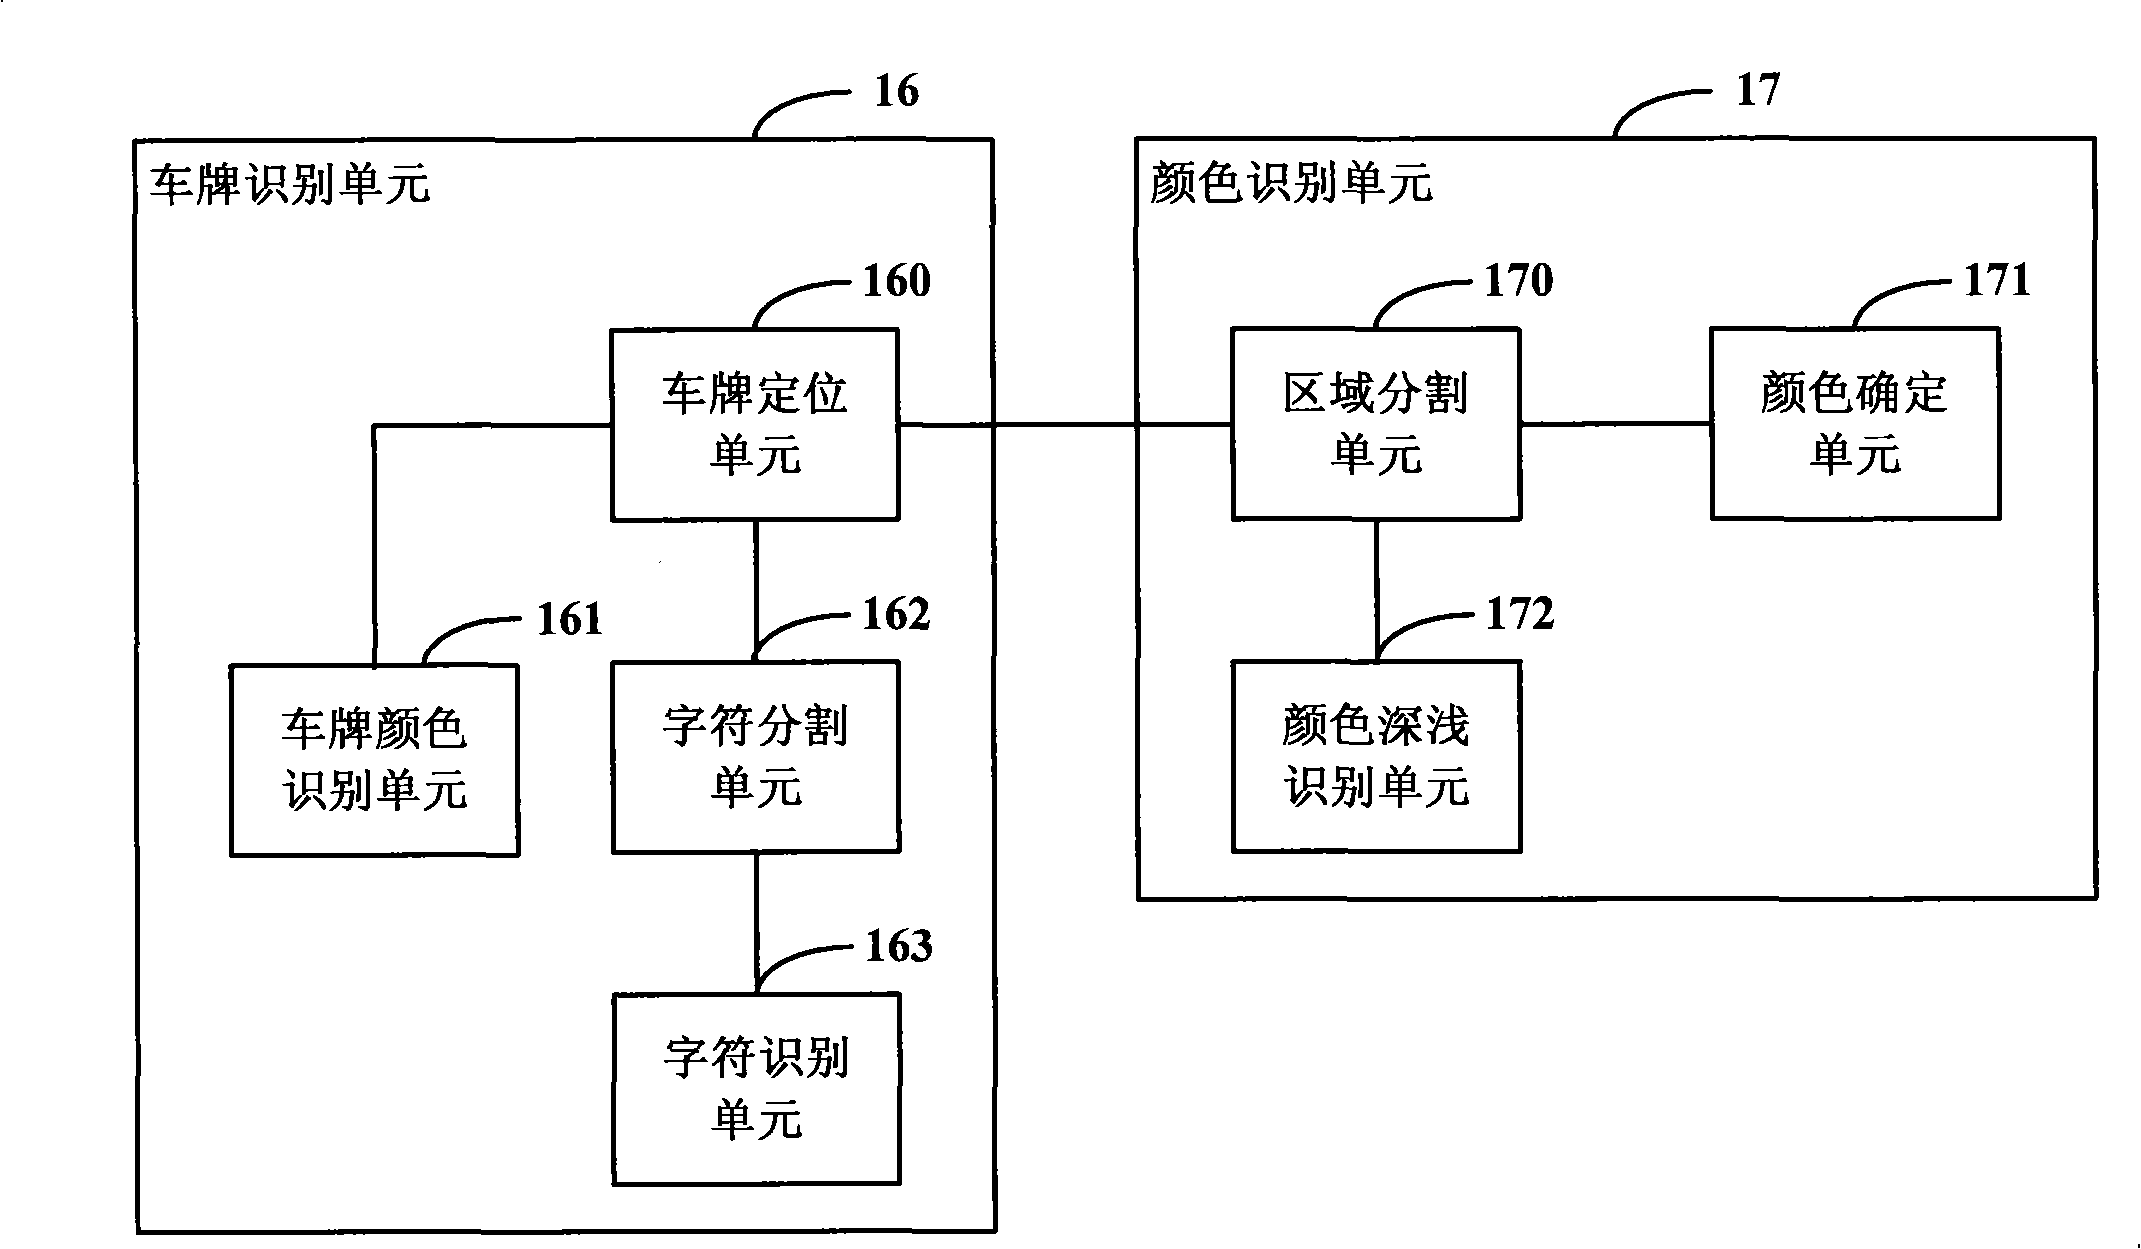 Image acquisition and processing equipment and method, vehicle monitoring and recording system